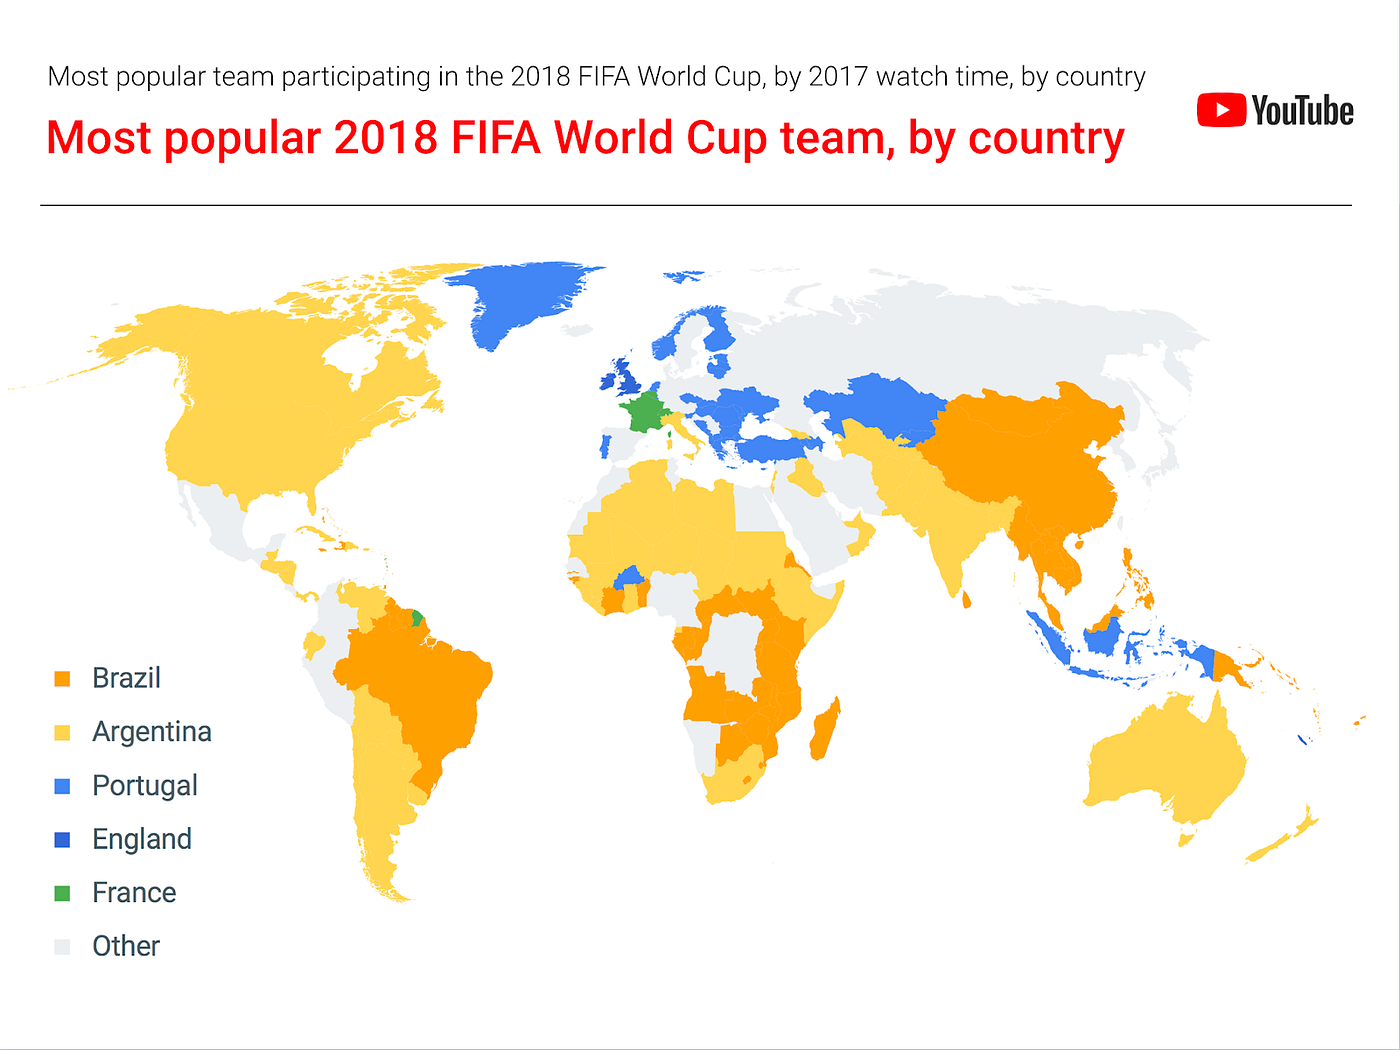 The FIFA World Cup on YouTube